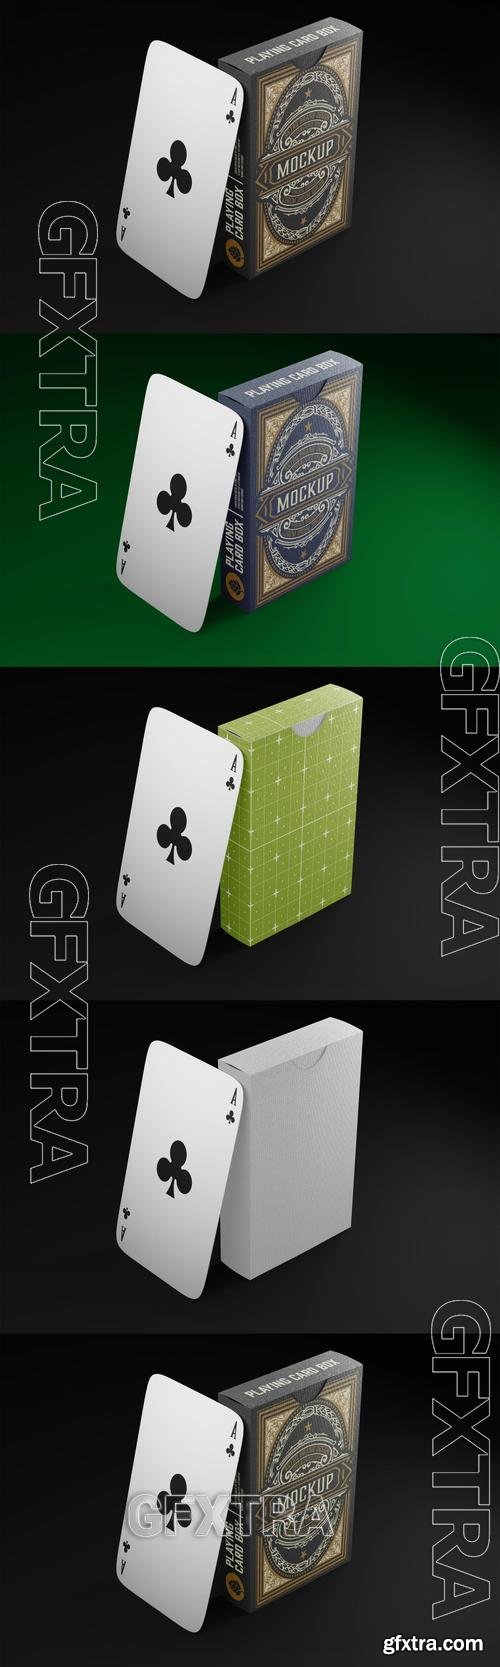 Box with Playing Cards Mockup ZC2N58S